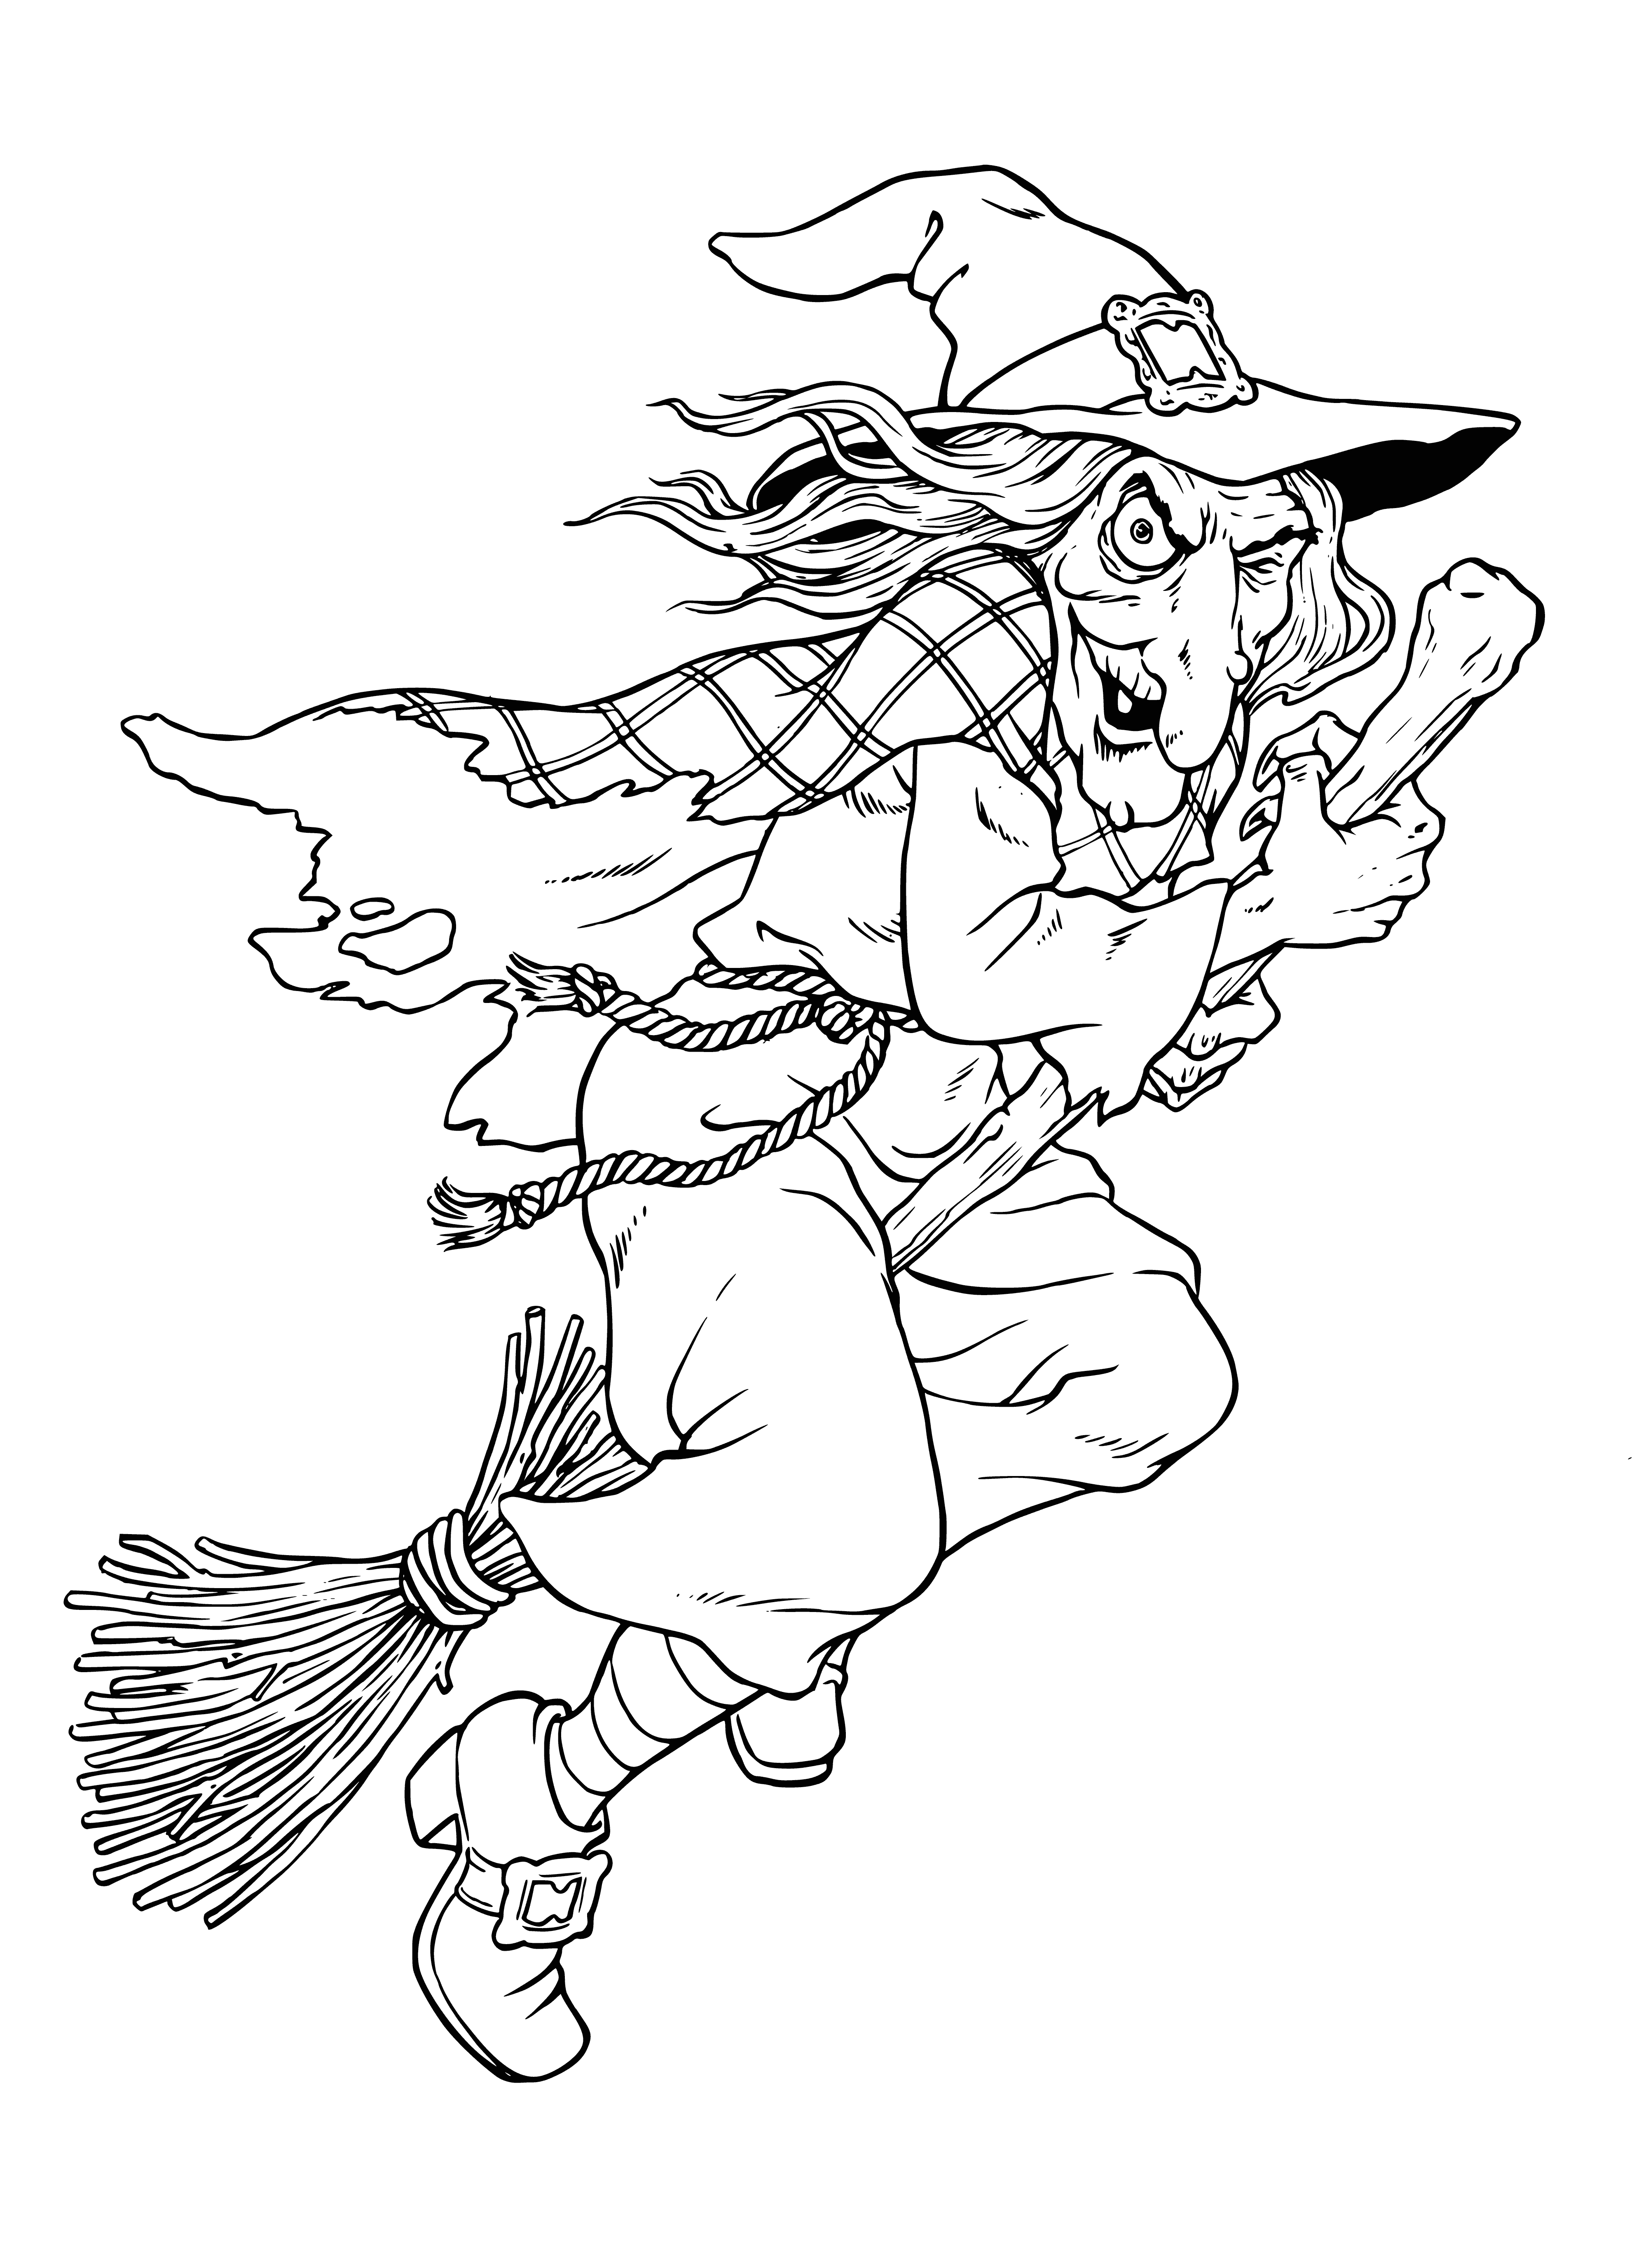 coloring page: A witch with black hair and green face, stirring a cauldron with a black cat nearby, wearing a black dress and pointy hat.